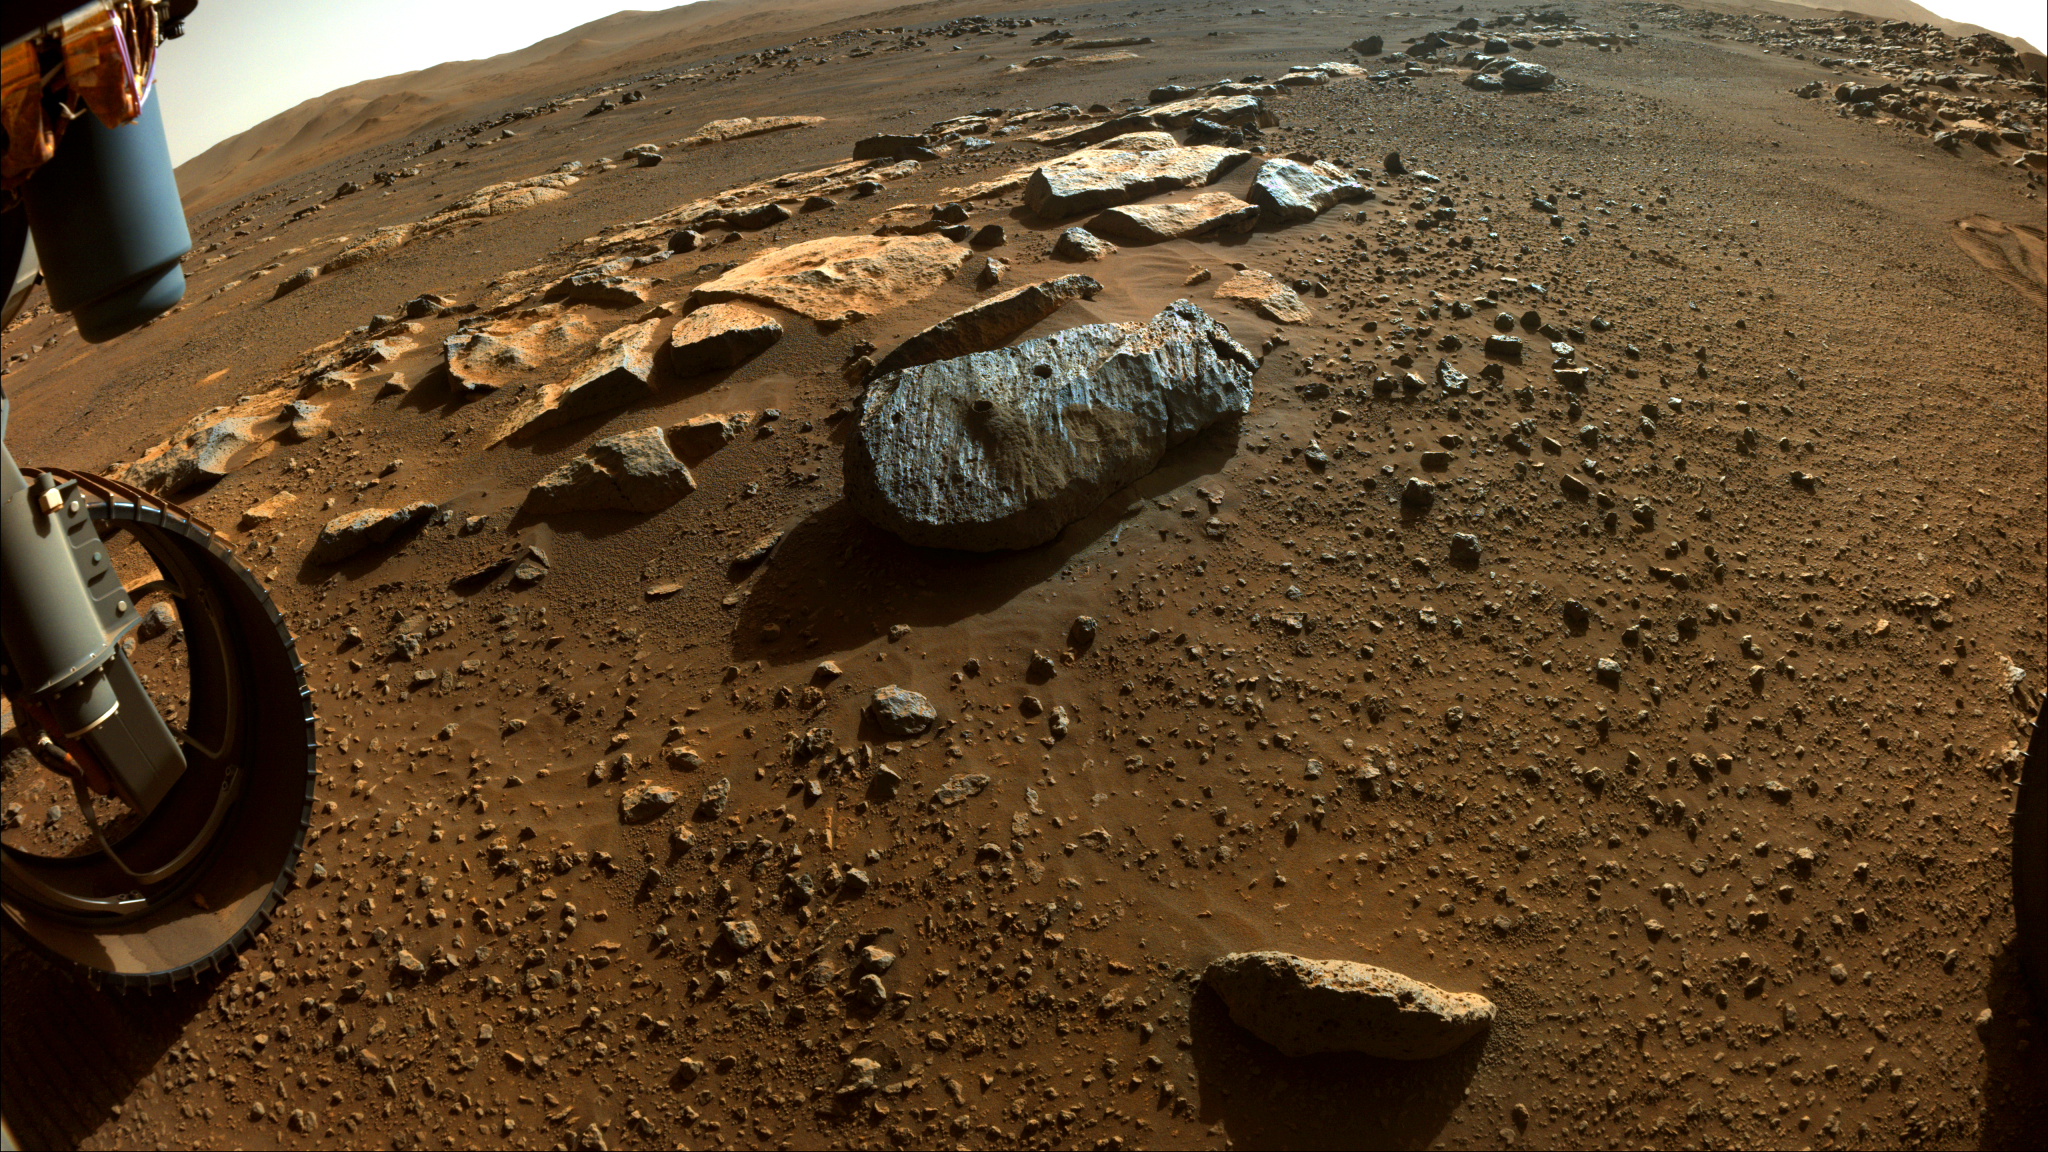 The rock, nicknamed “Rochette,” from which NASA’s Perseverance rover obtained its first core samples, seen with two holes drilled in it.